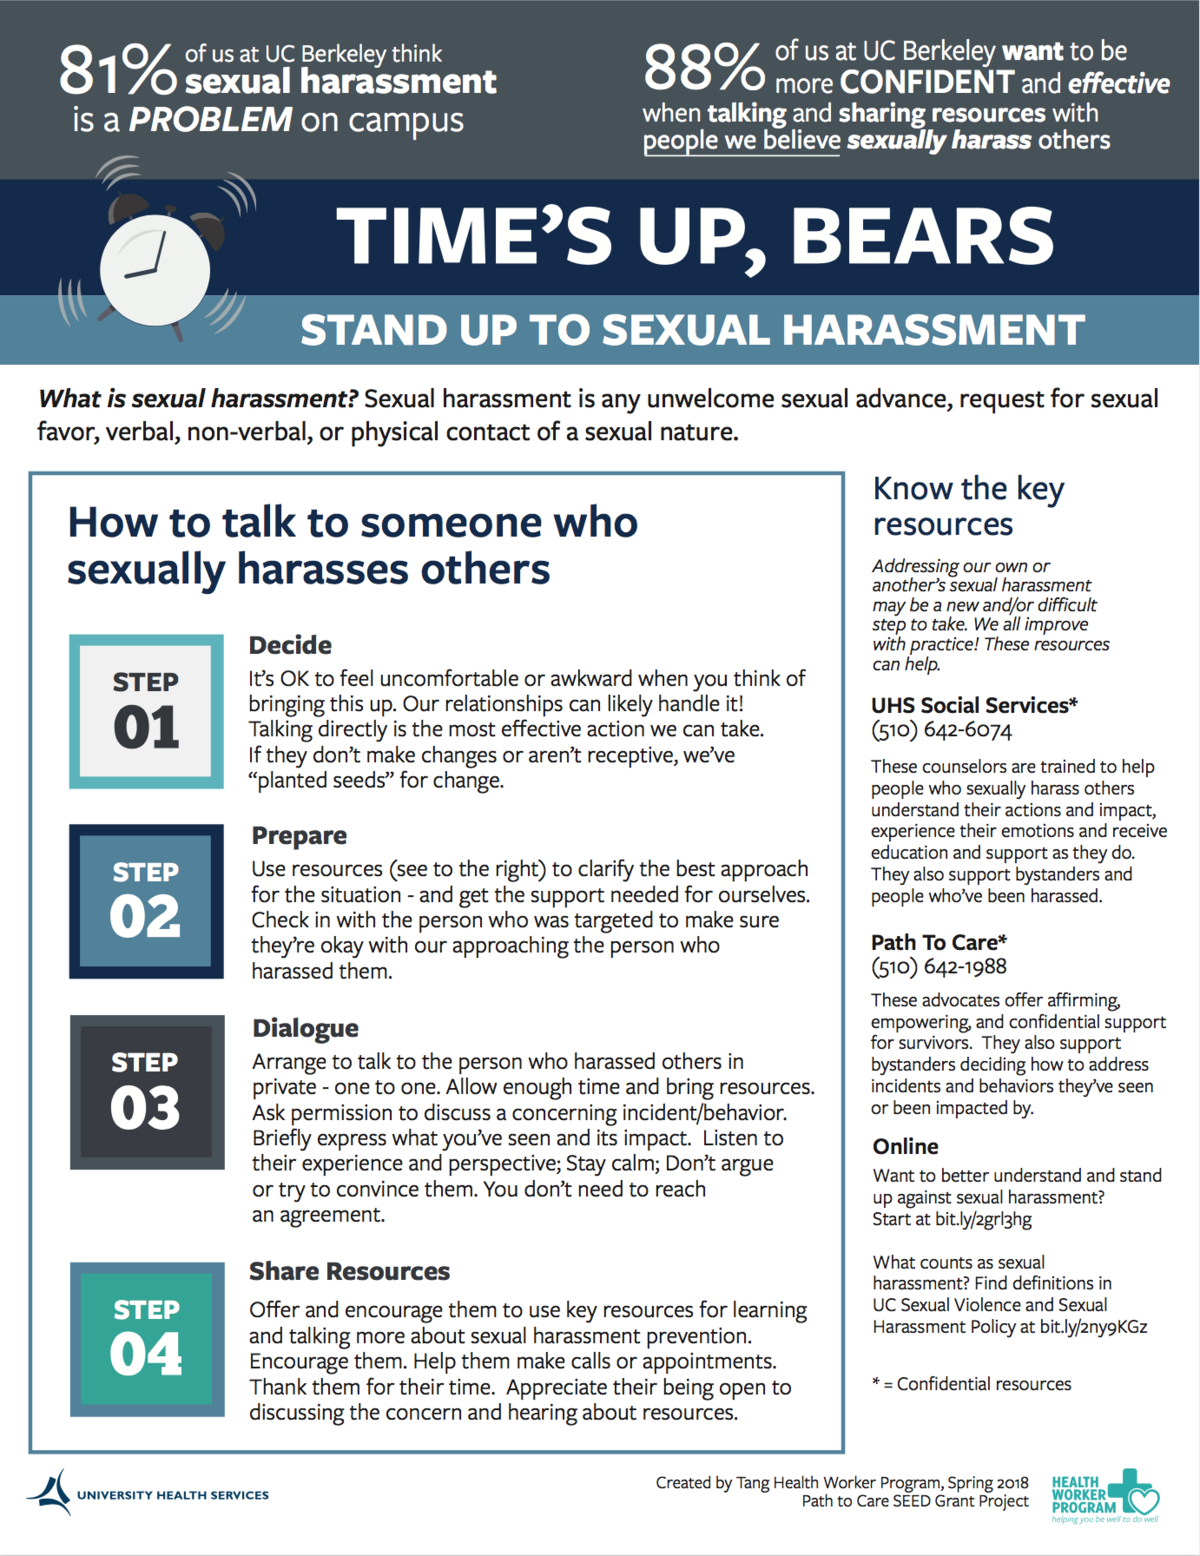 Time's Up Bears Resource